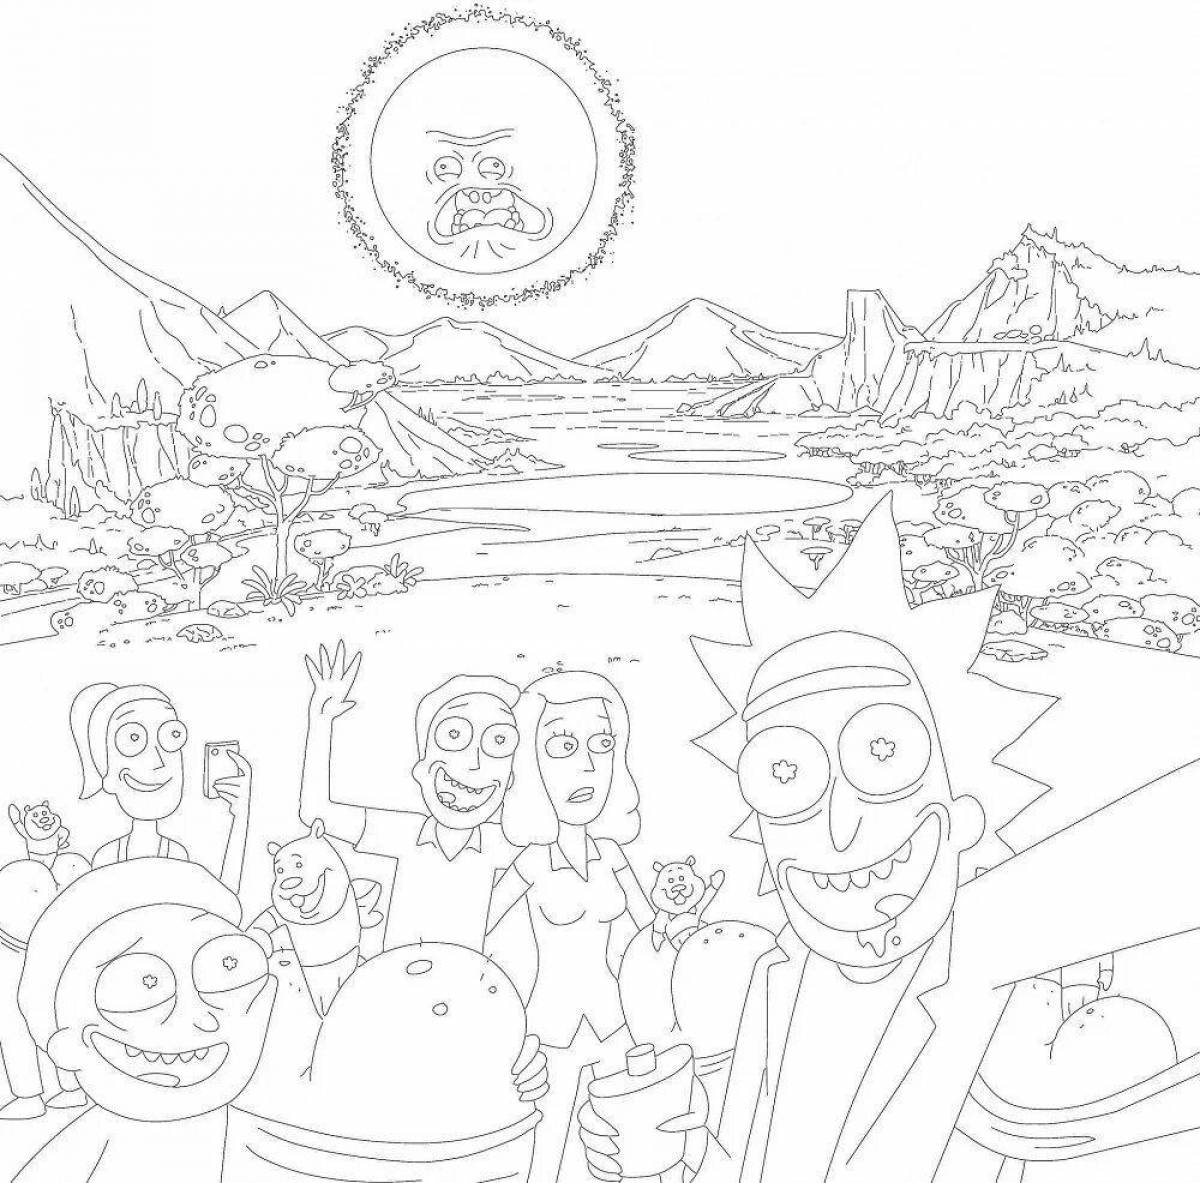 Rick's innovative coloring page